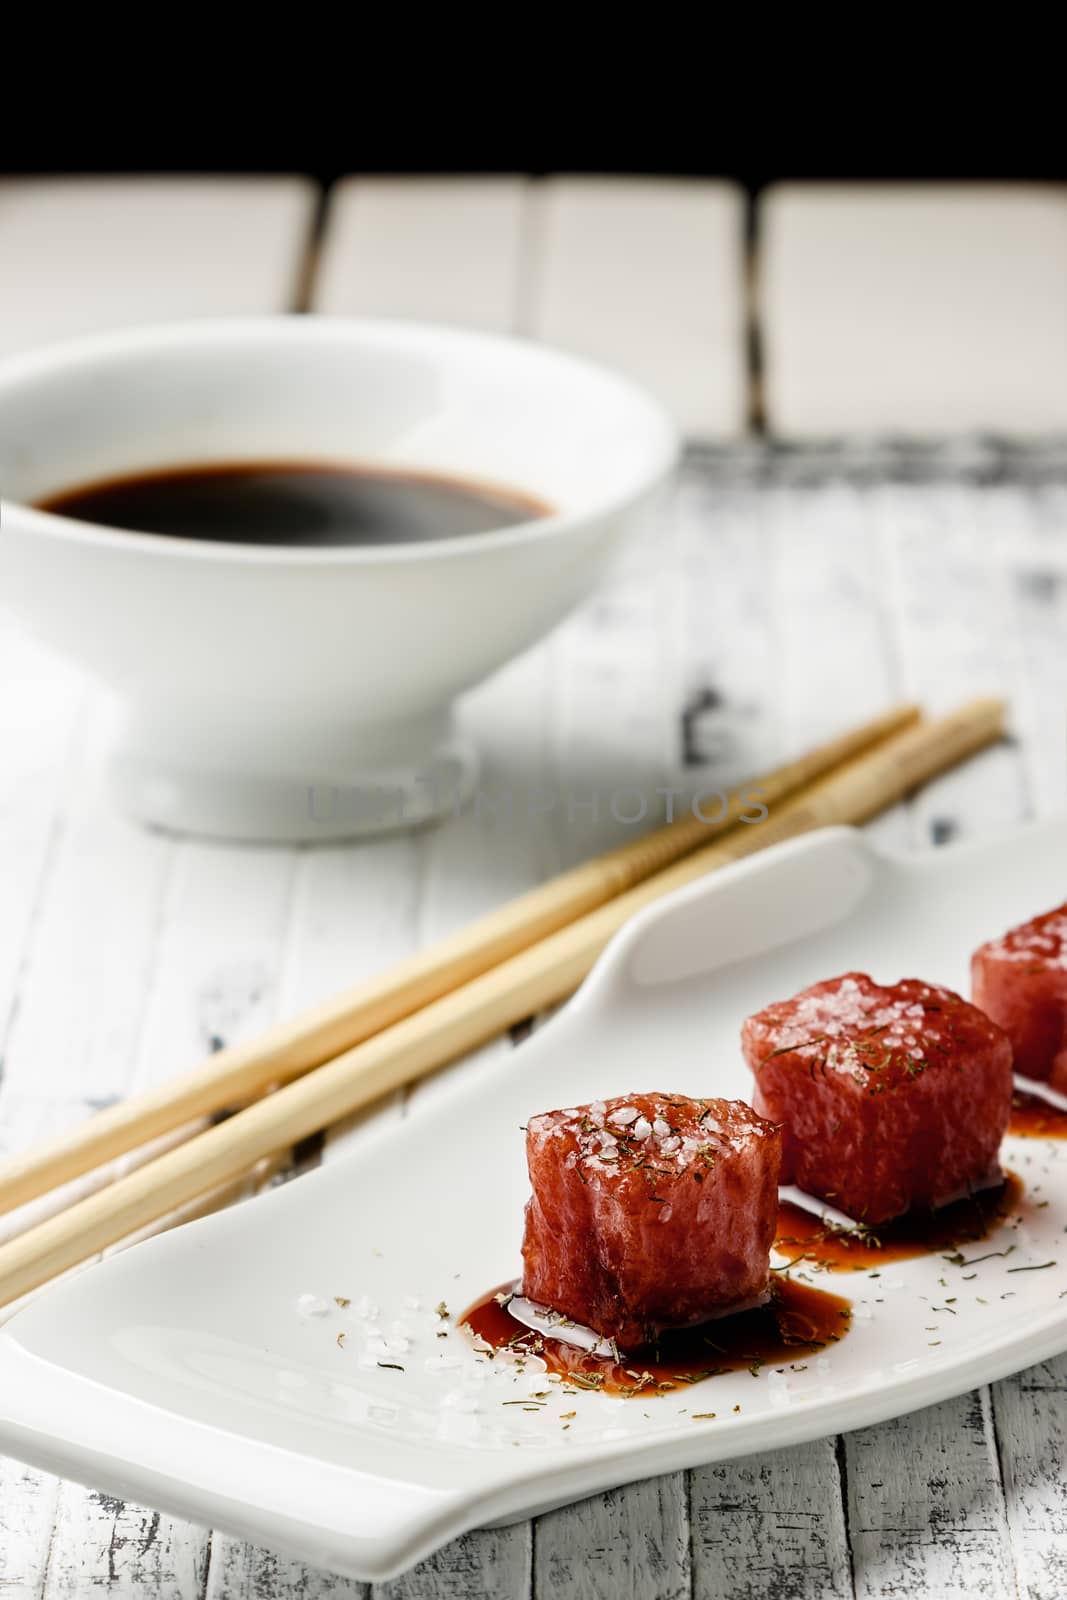 Tuna sashimi dipped in soy sauce,  thick salt and dill on old white wooden board with chopsticks and sauce bowl. Raw fish in traditional Japanese style. Vertical image.